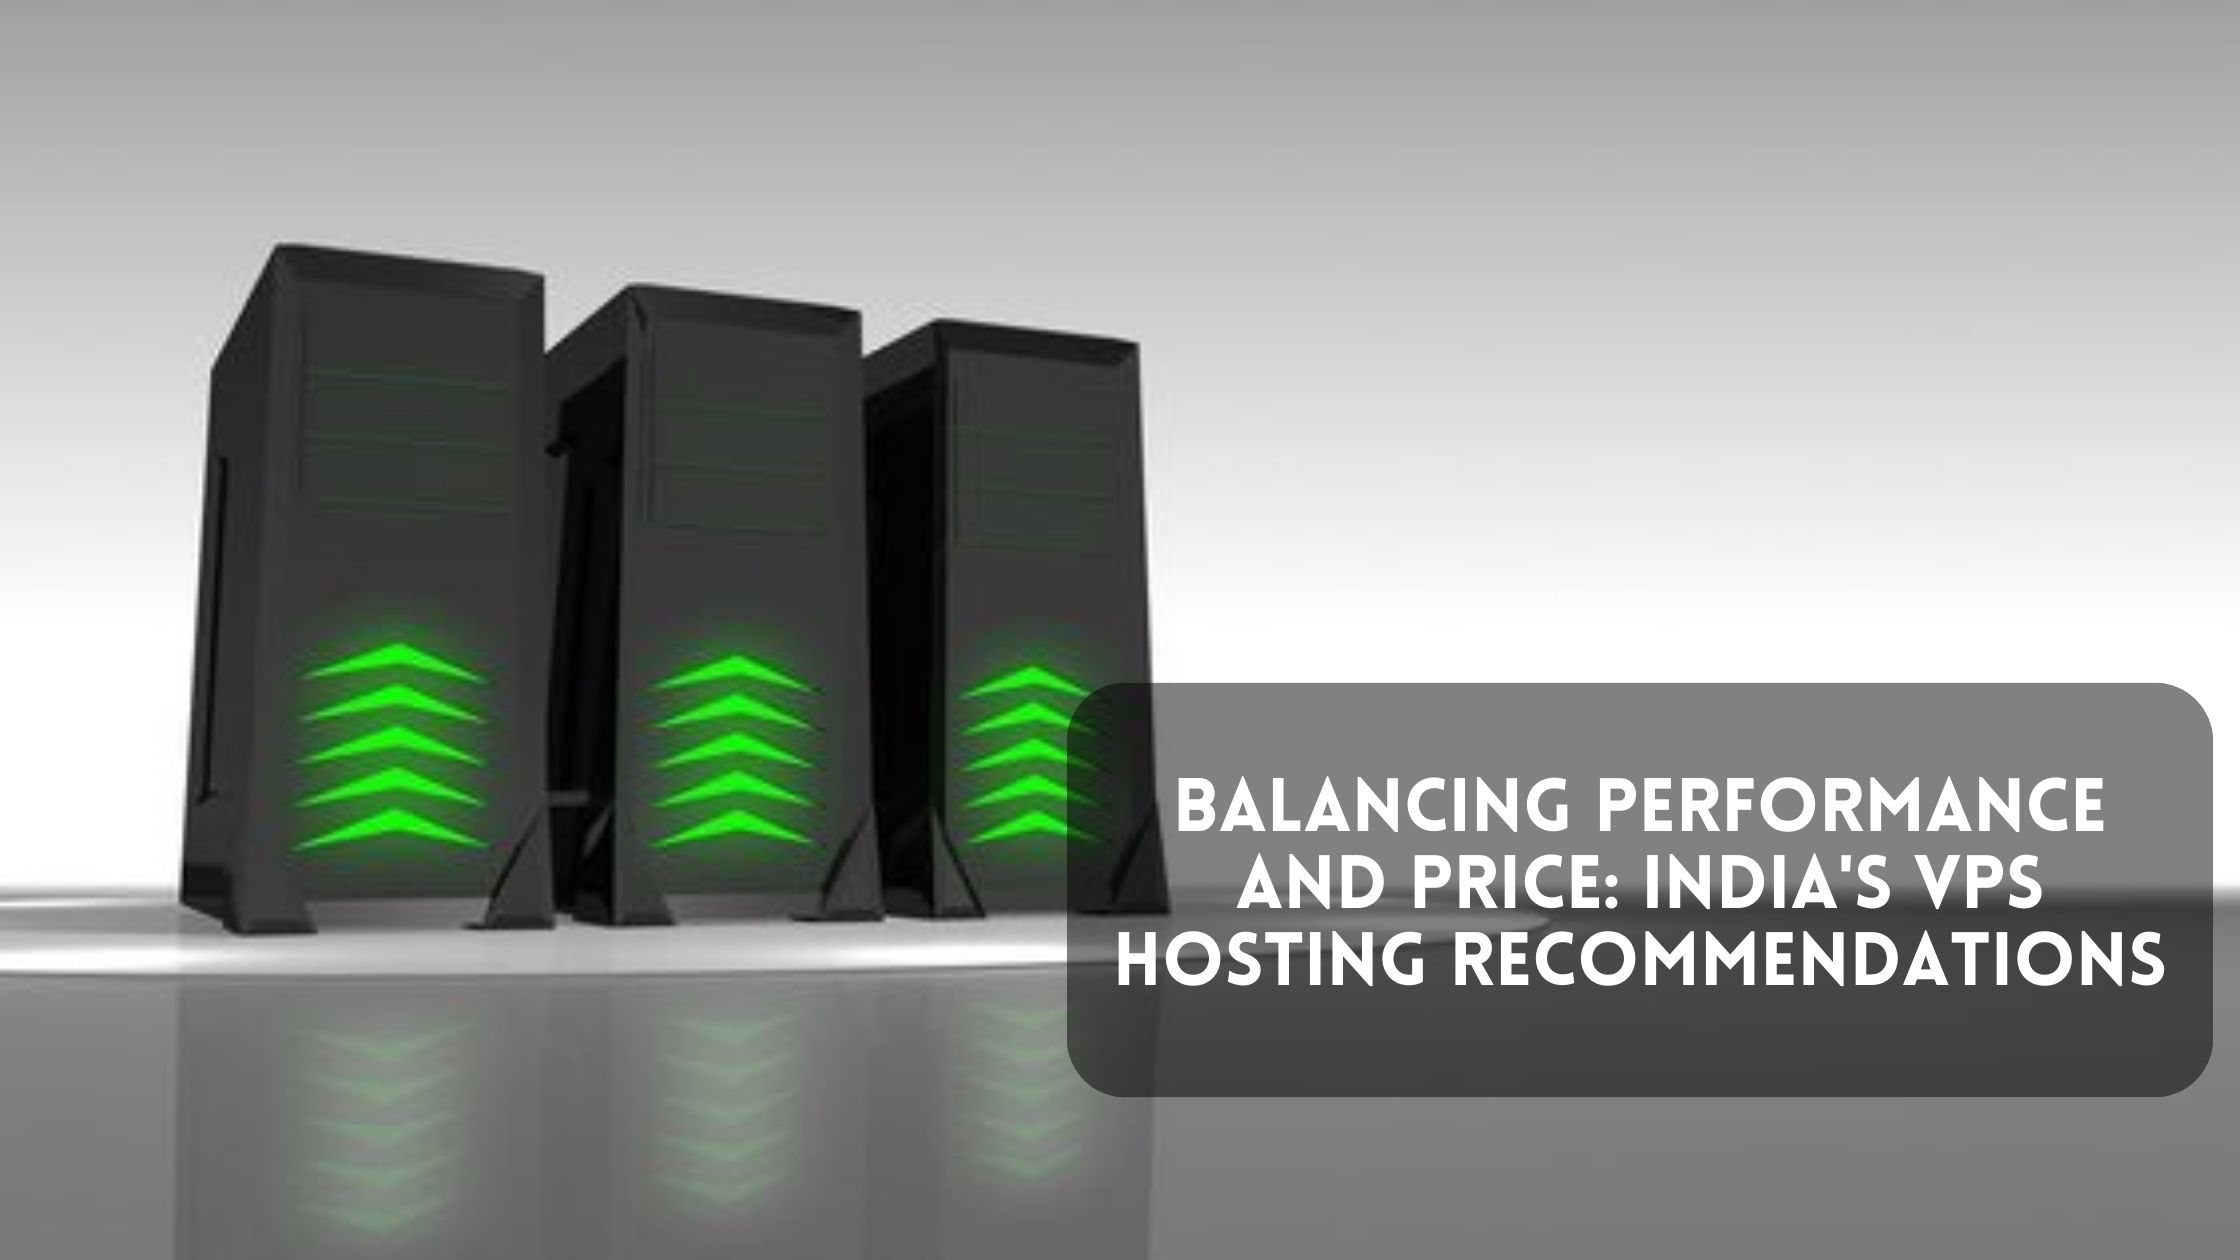 Balancing Performance and Price: India’s VPS Hosting Recommendations